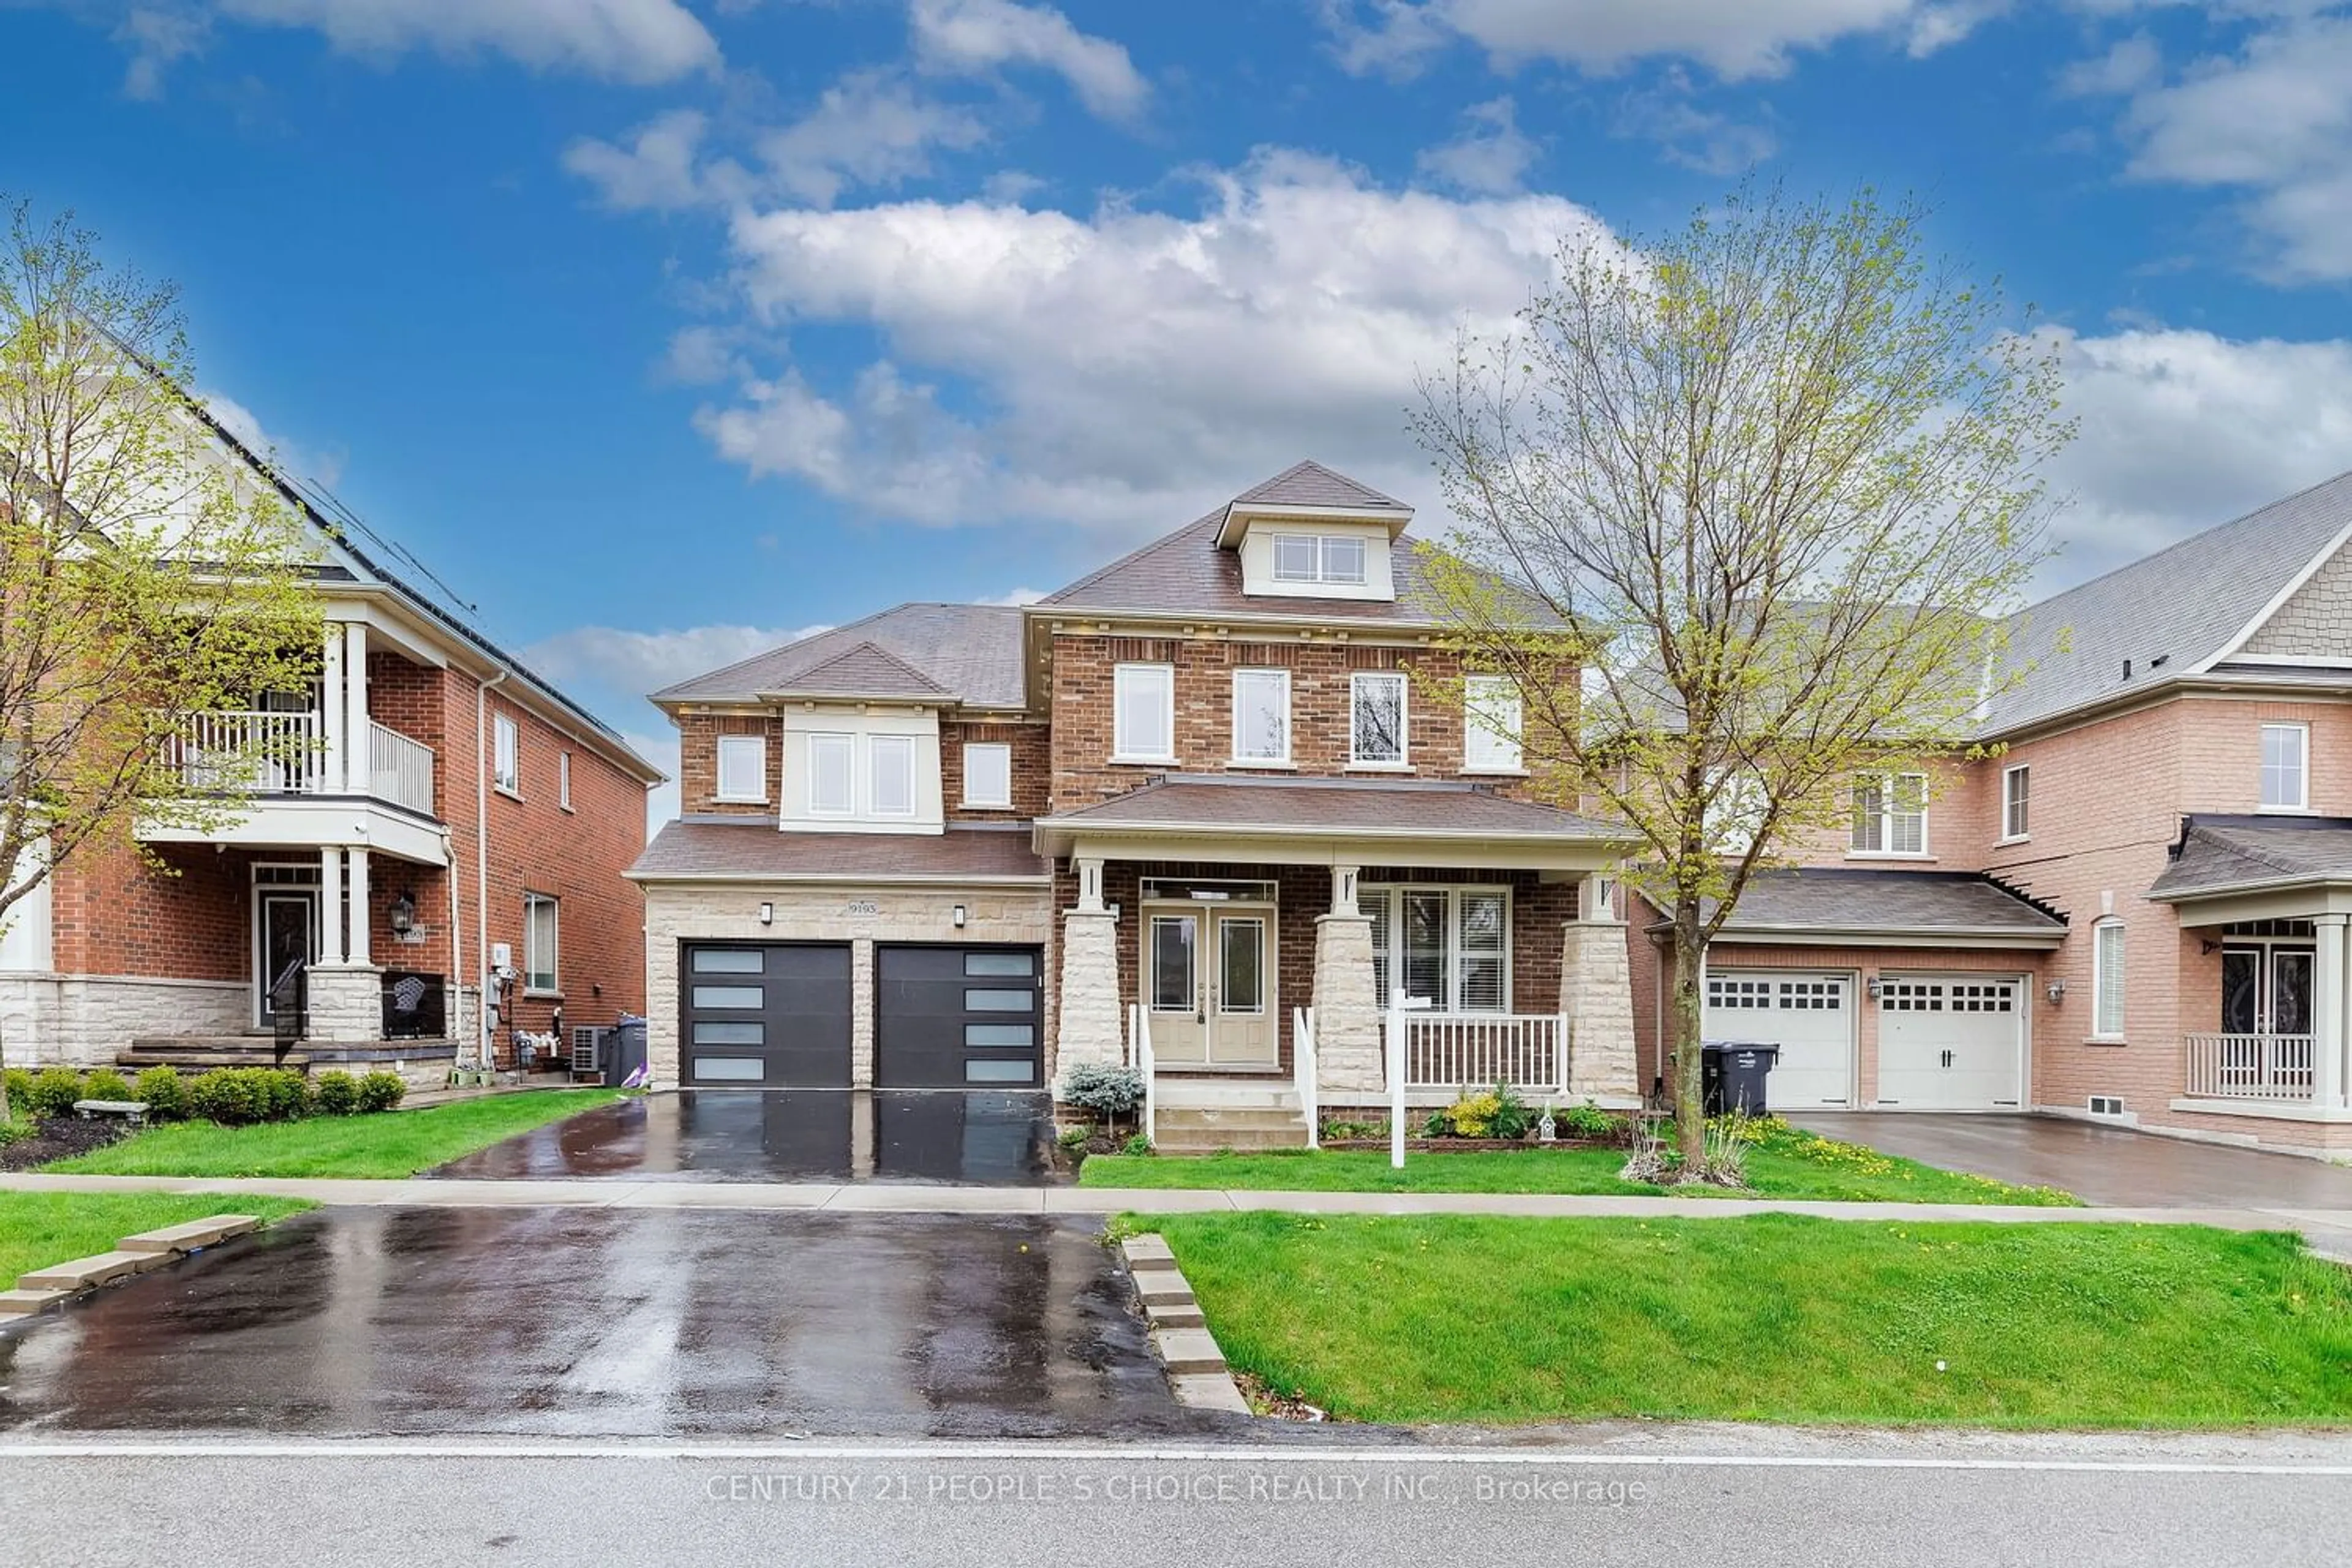 Home with brick exterior material for 9193 Creditview Rd, Brampton Ontario L6X 0N8